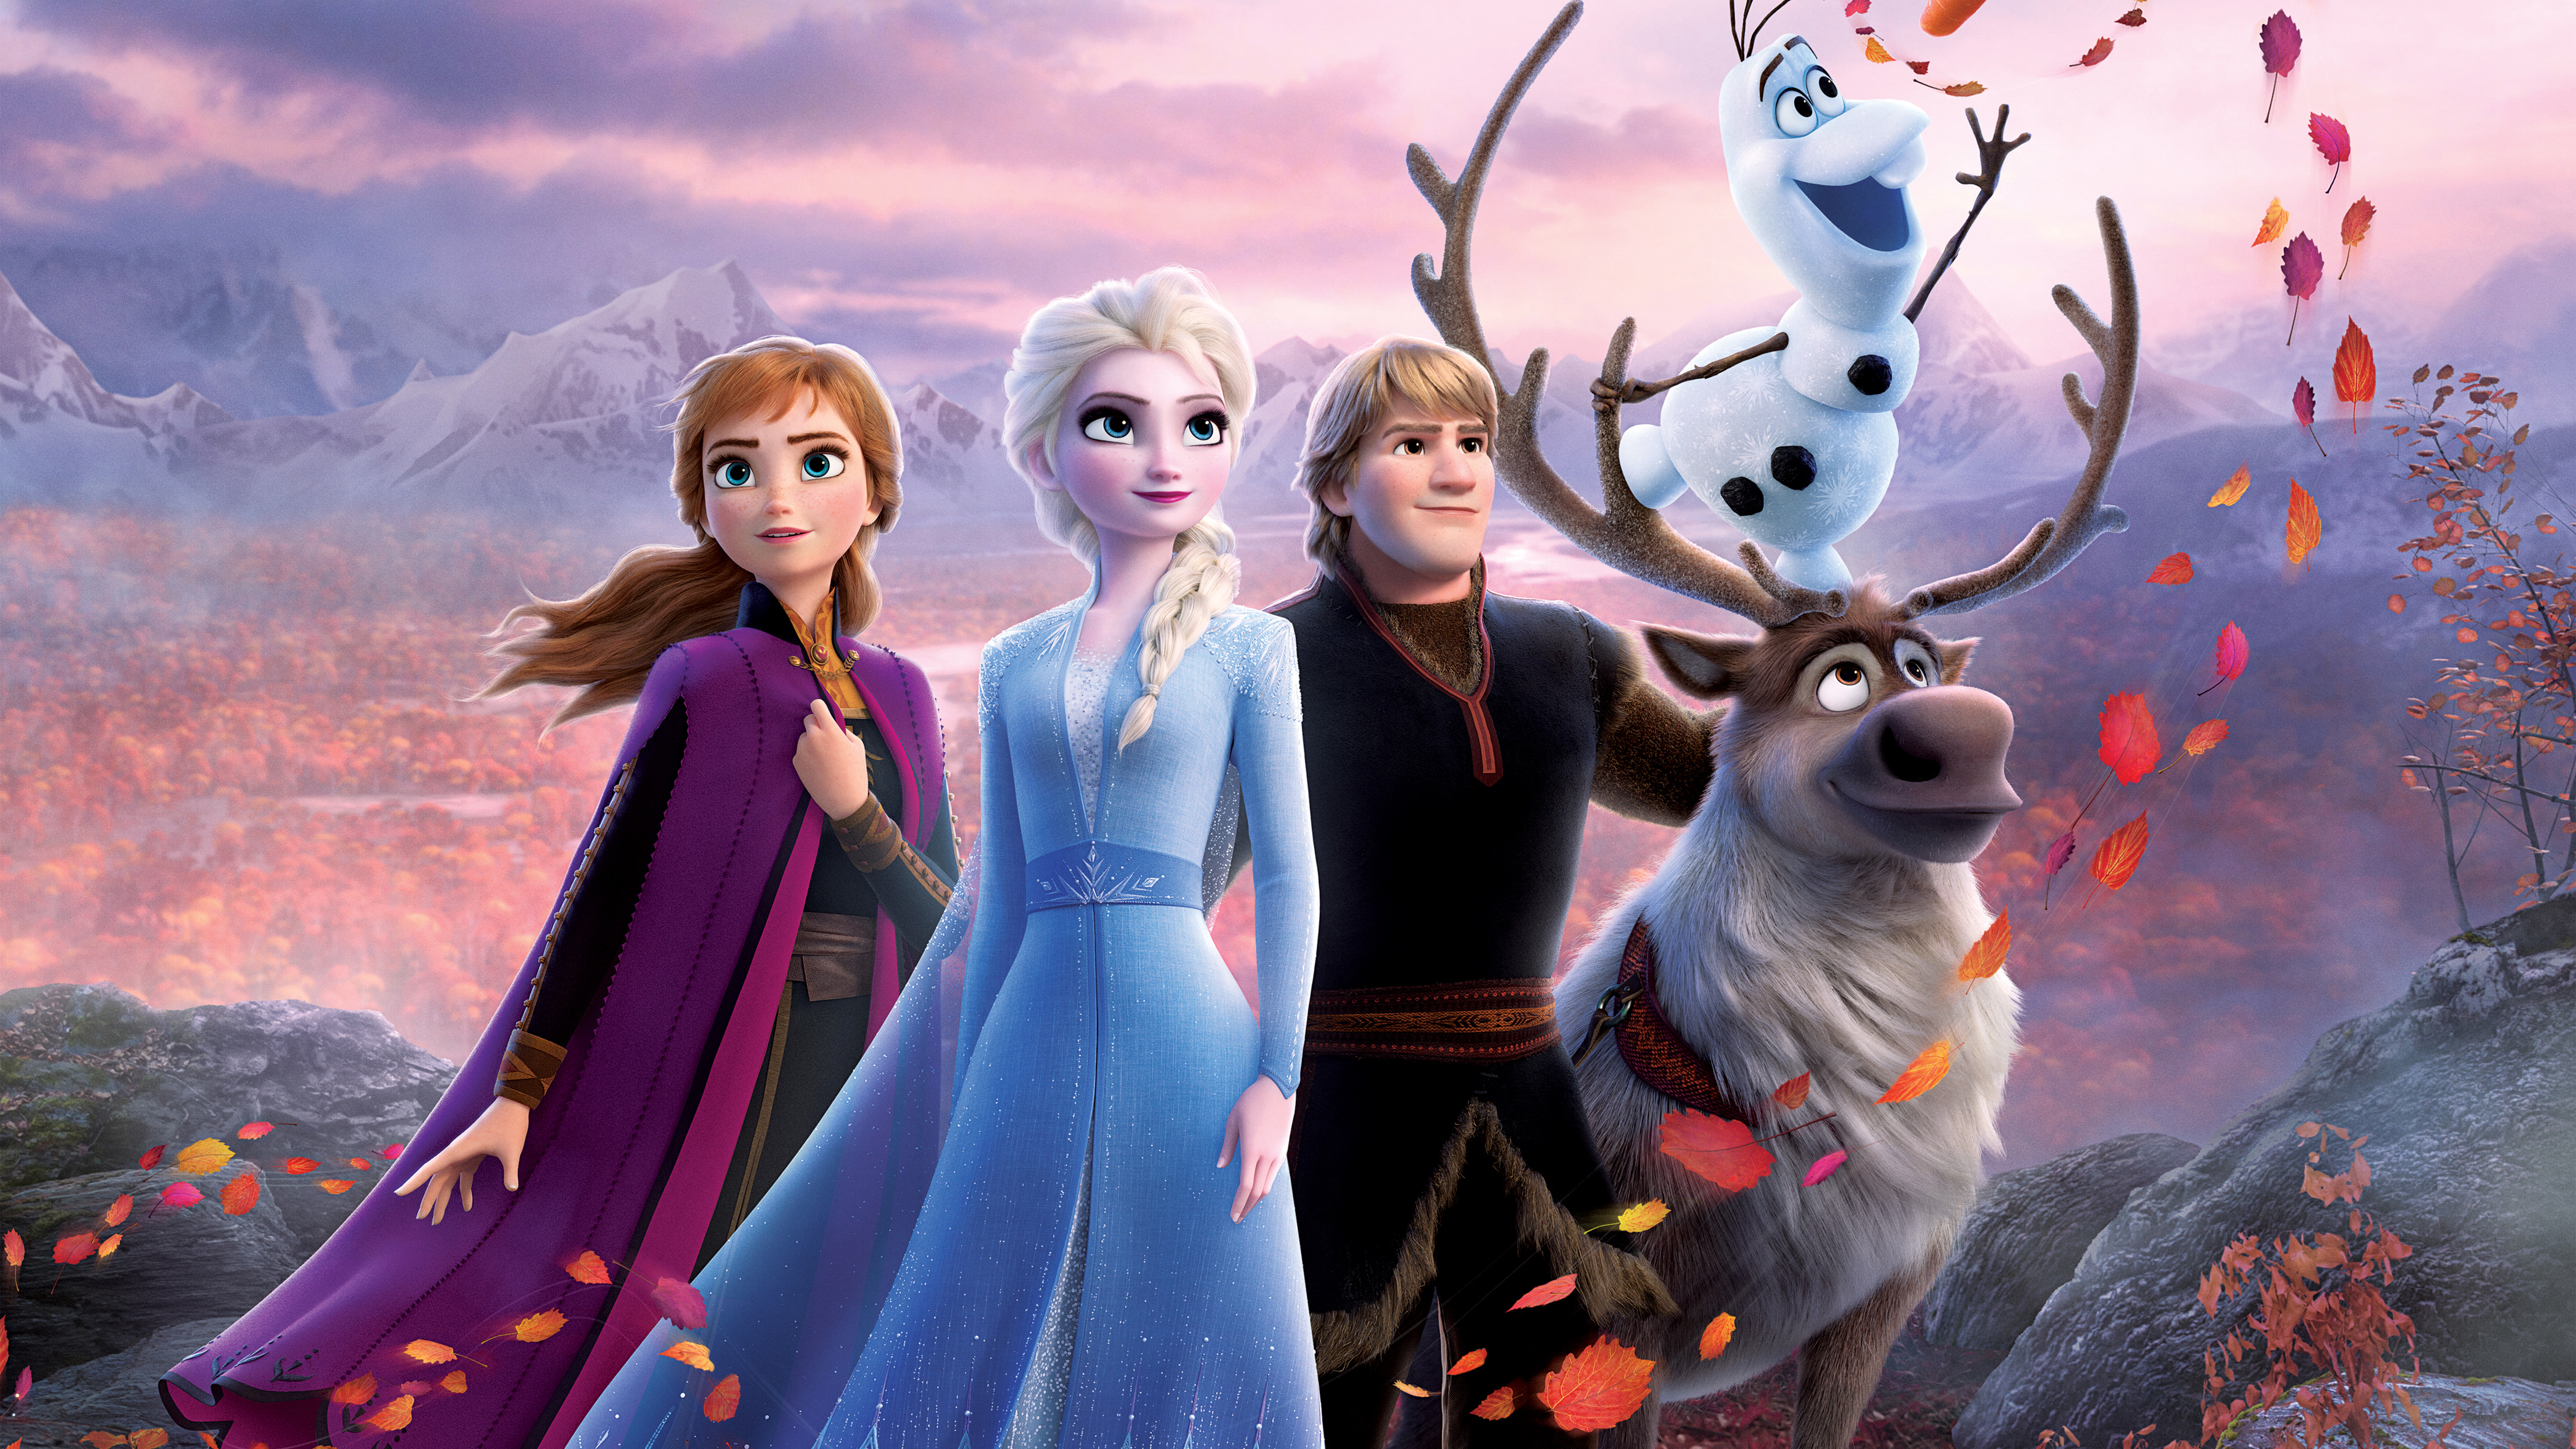 Download Kristoff (Frozen) wallpapers for mobile phone, free Kristoff ( Frozen) HD pictures